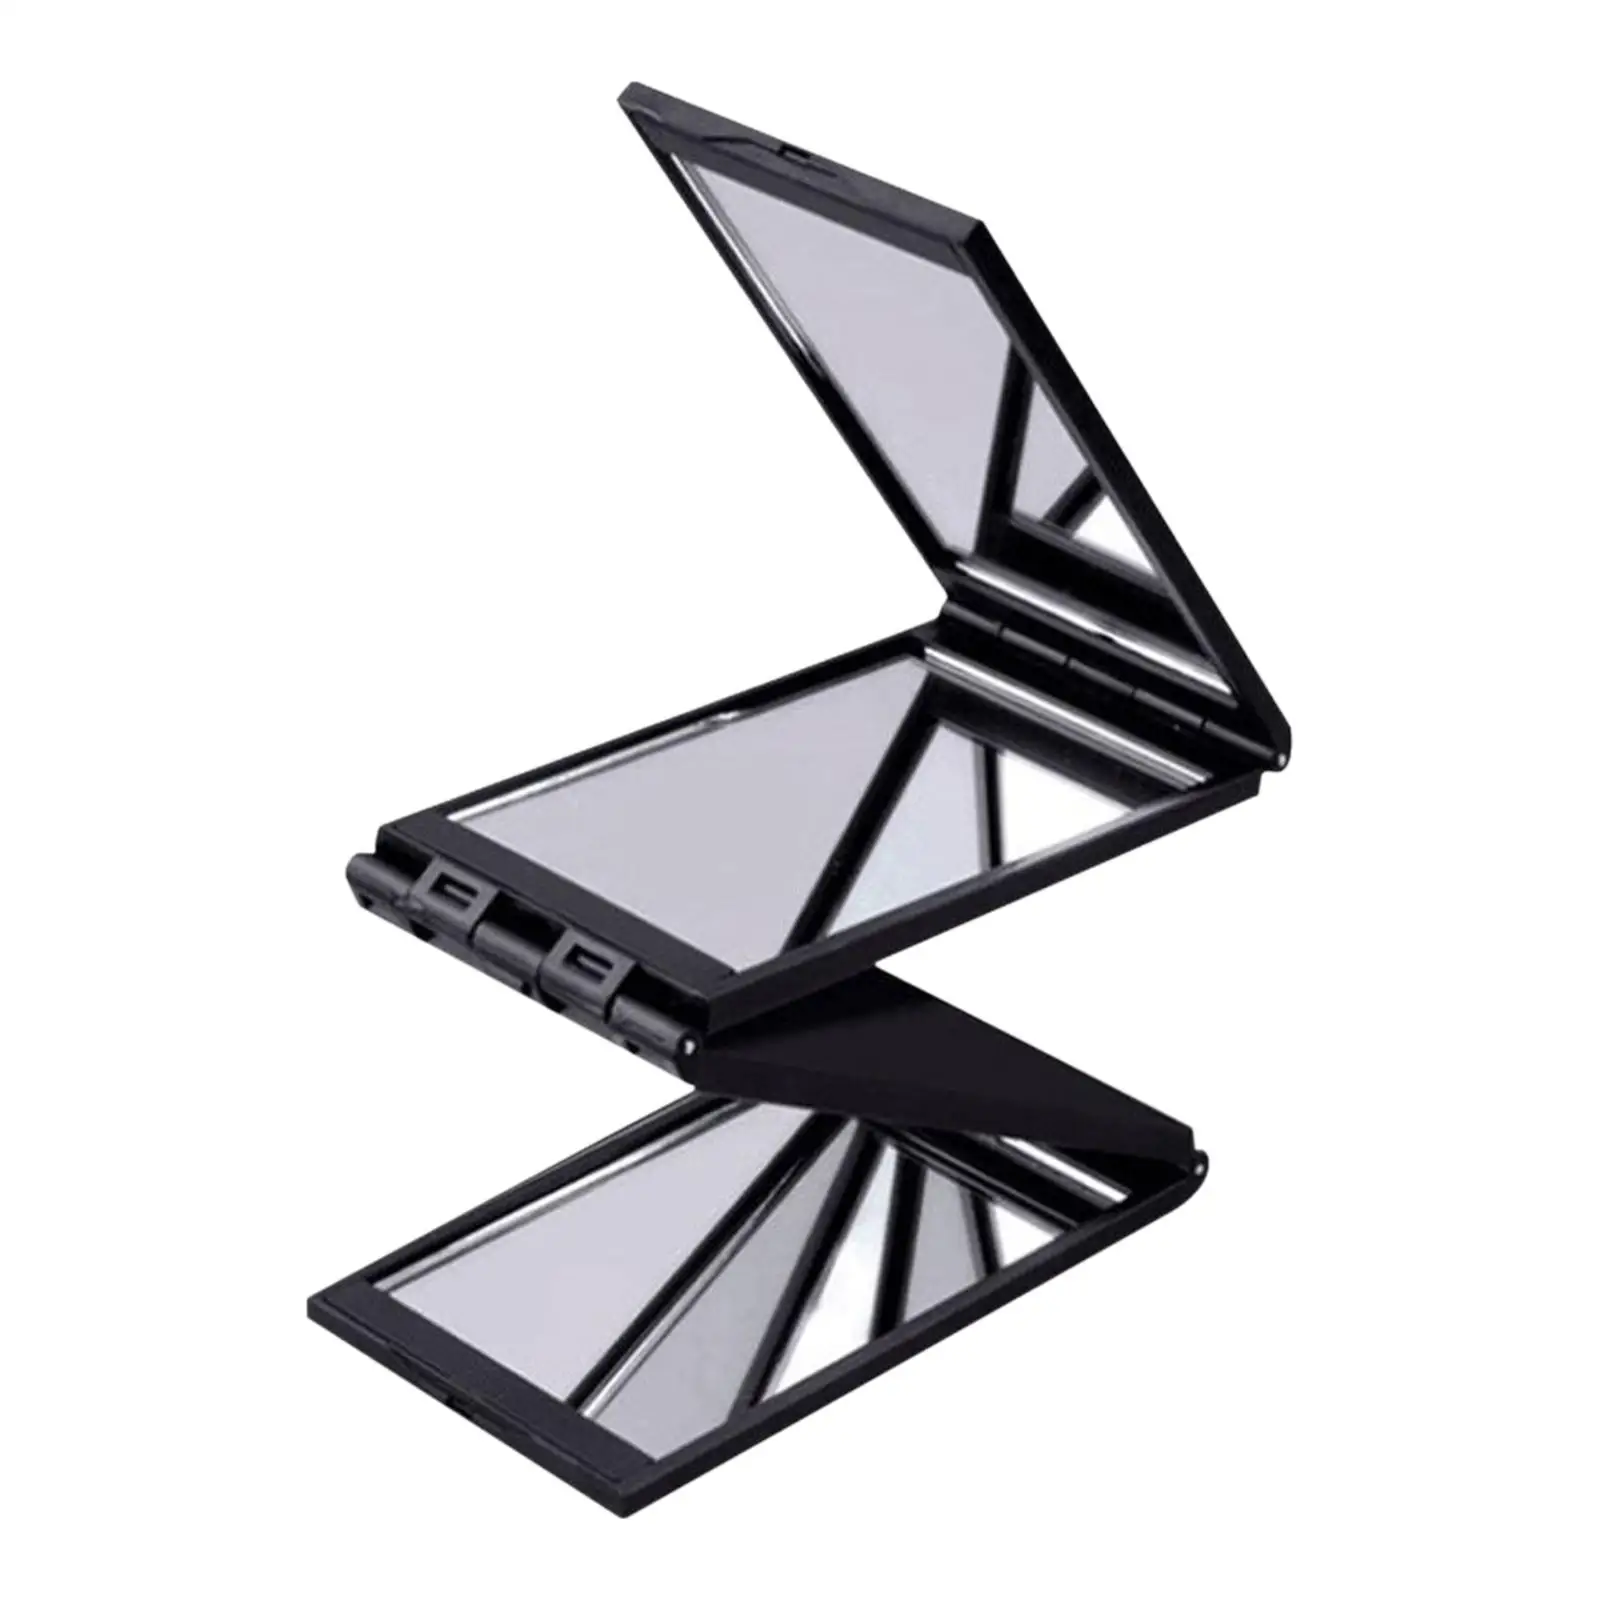 4 Sided Foldable Makeup Mirror Durable Girl Compact Mirror Clear Cosmetic Vanity Mirror for Countertop Dorm Salon Home Skincare